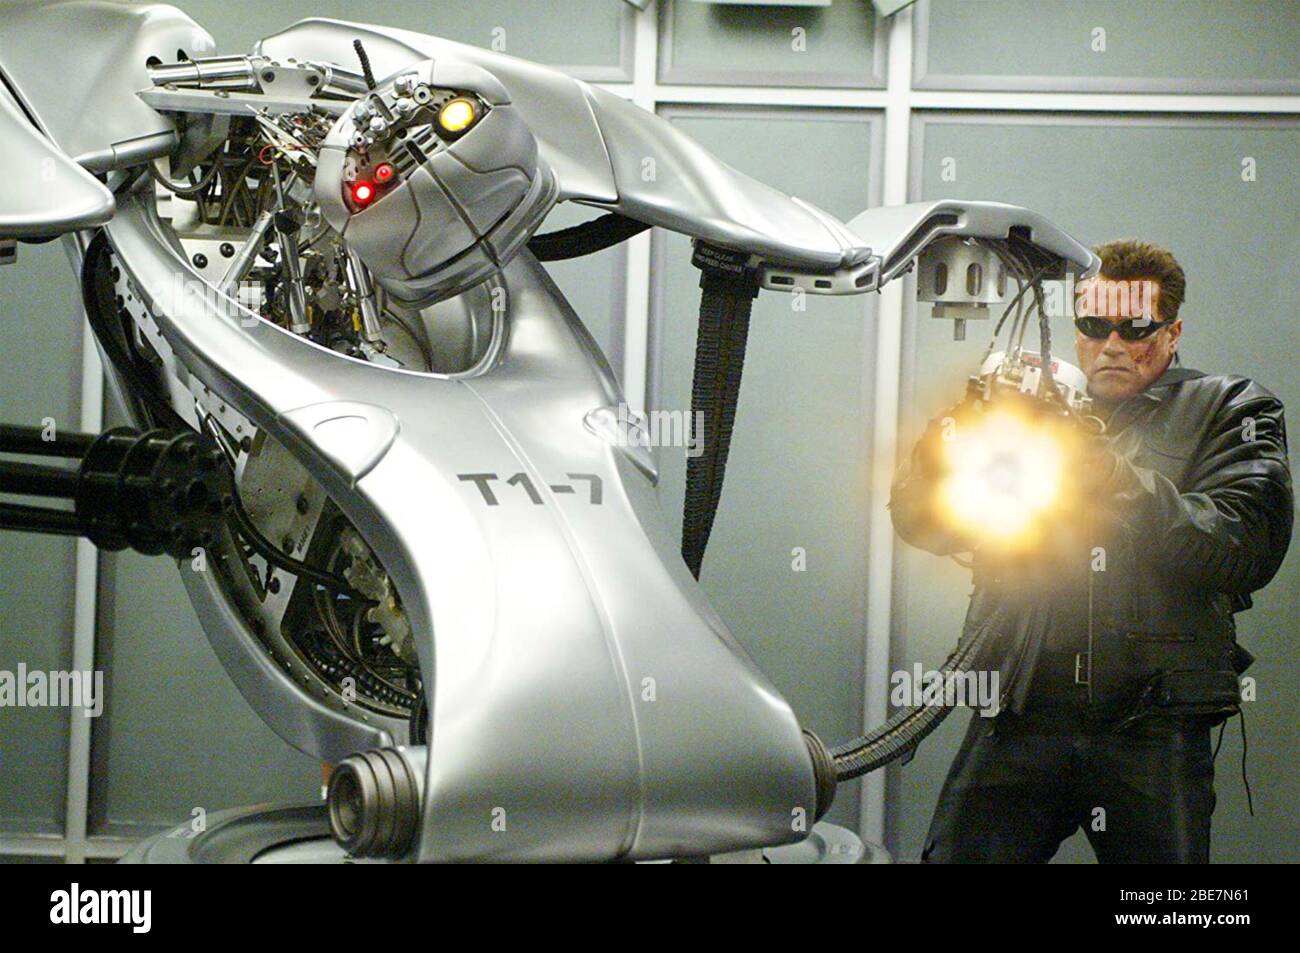 TERMINATOR 3: RISE OF THE MACHINES (aka T3) 2003 Columbia/TriStar Pictures film with Arnold Schwarzenegger. Stock Photo